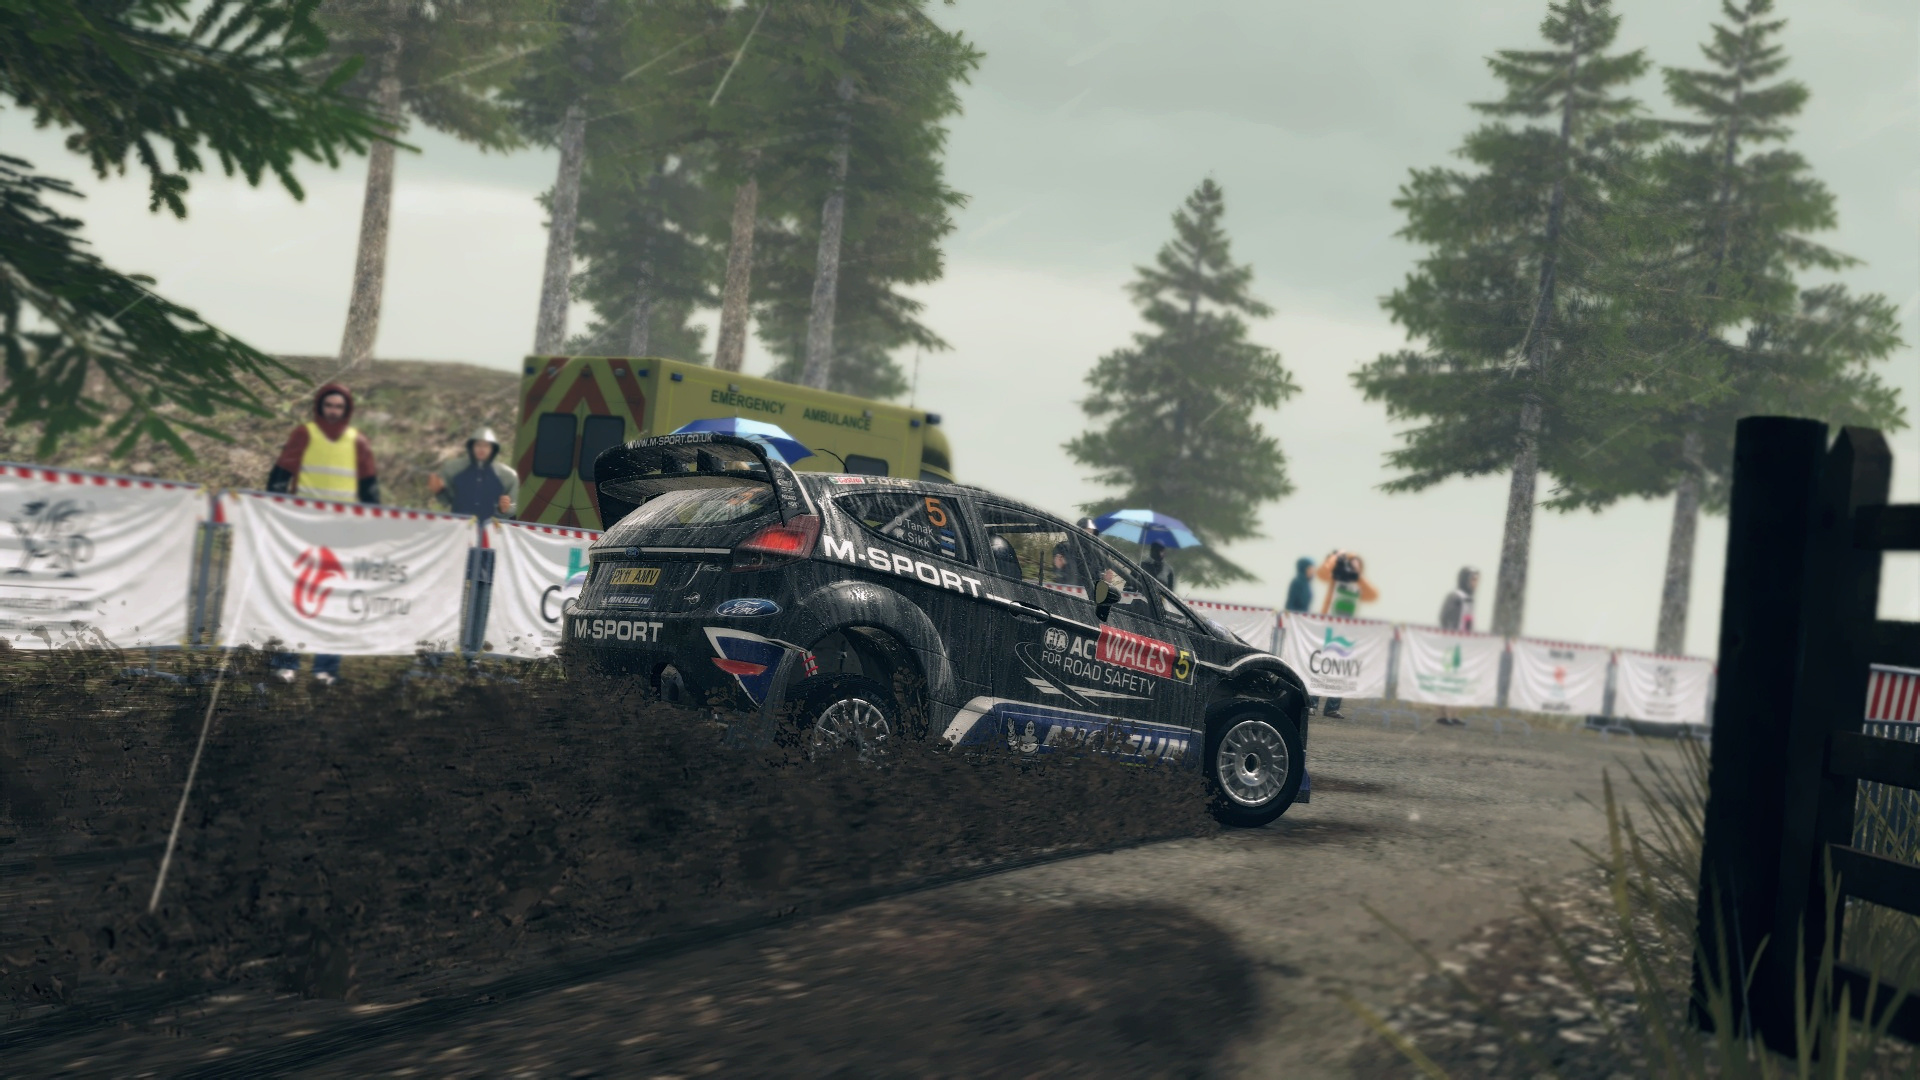 Video Game WRC 3 HD Wallpaper | Background Image